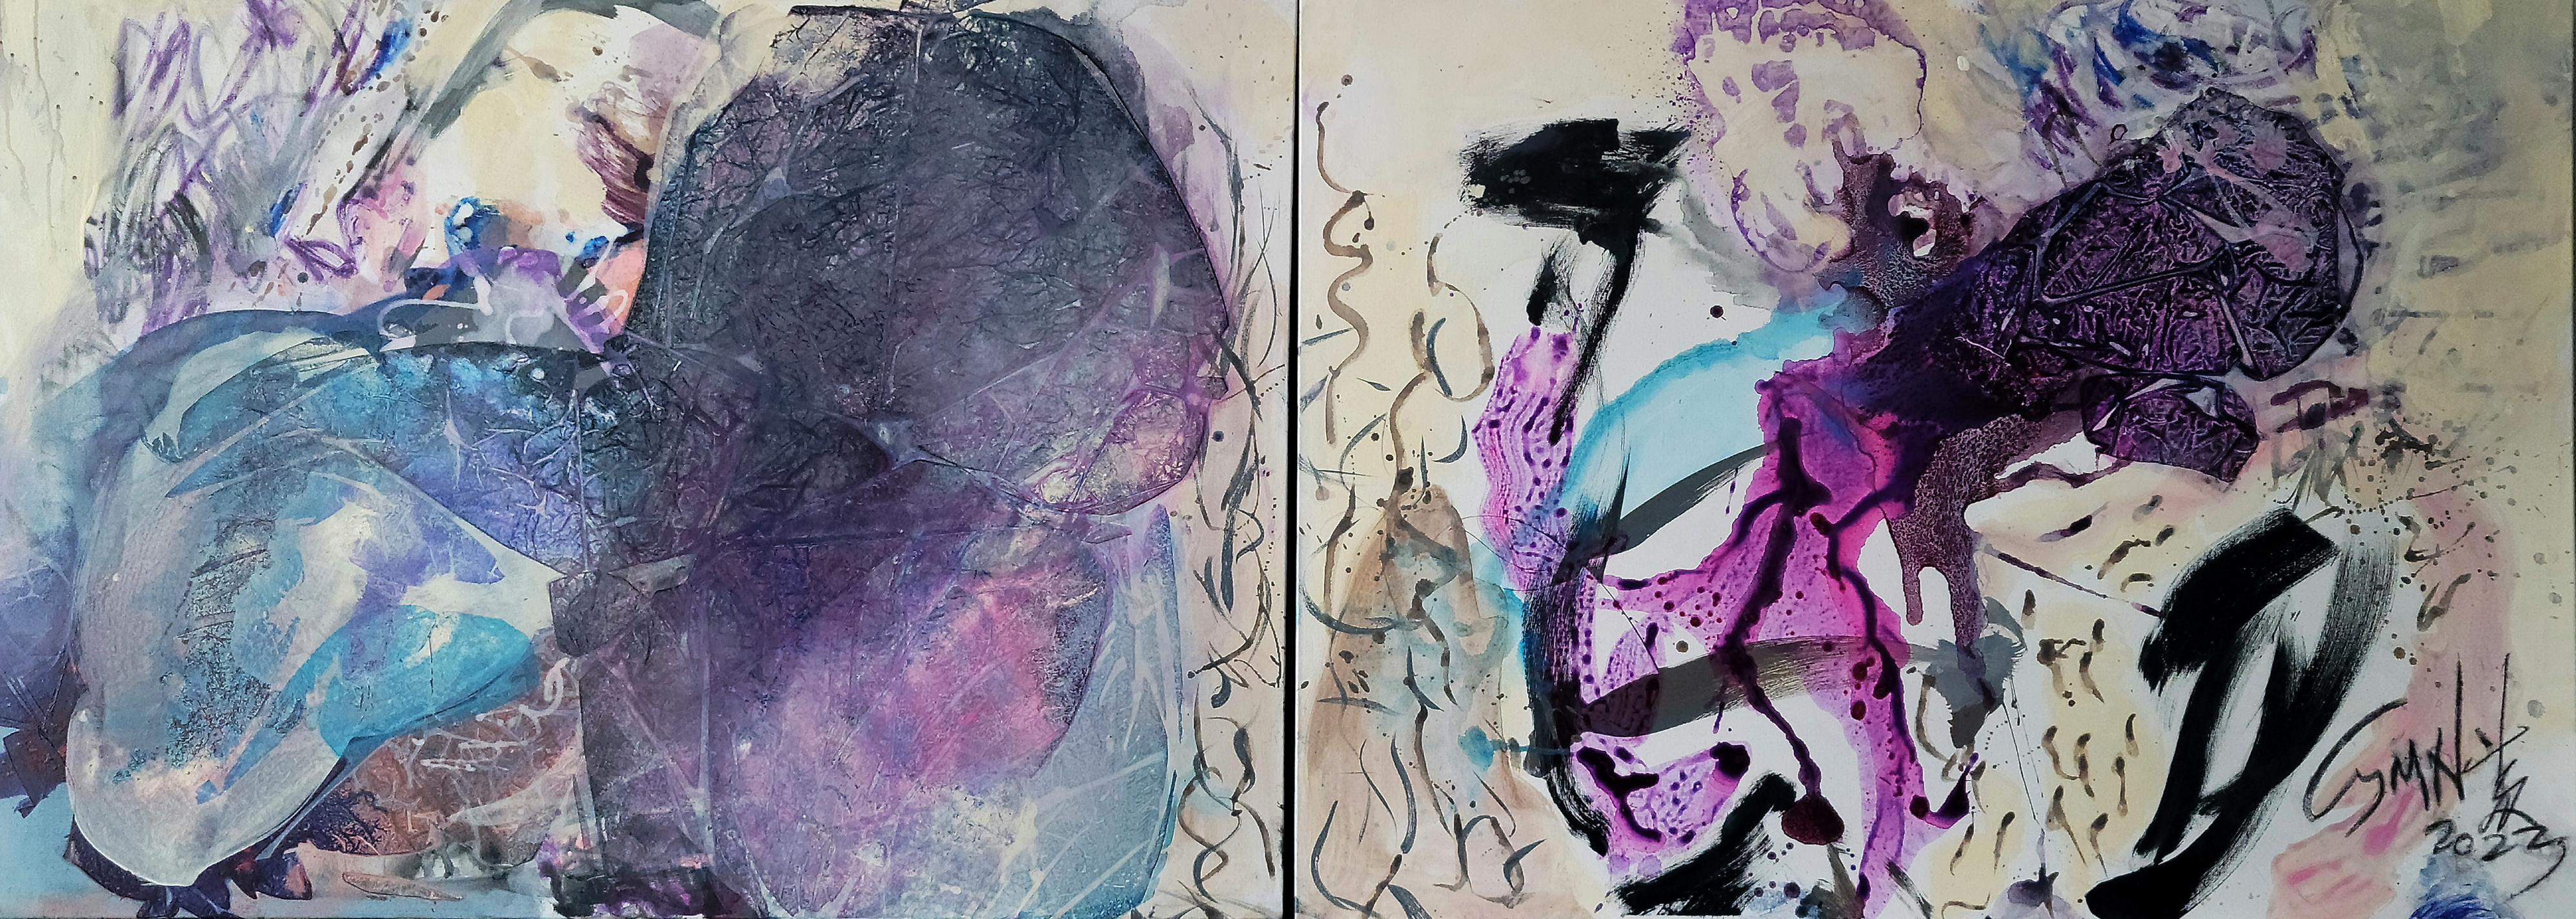 Two Souls, One Awakening-Metamorphic, Expressive Abstract, Zen Calligraphy - Painting by Cymn Wong 